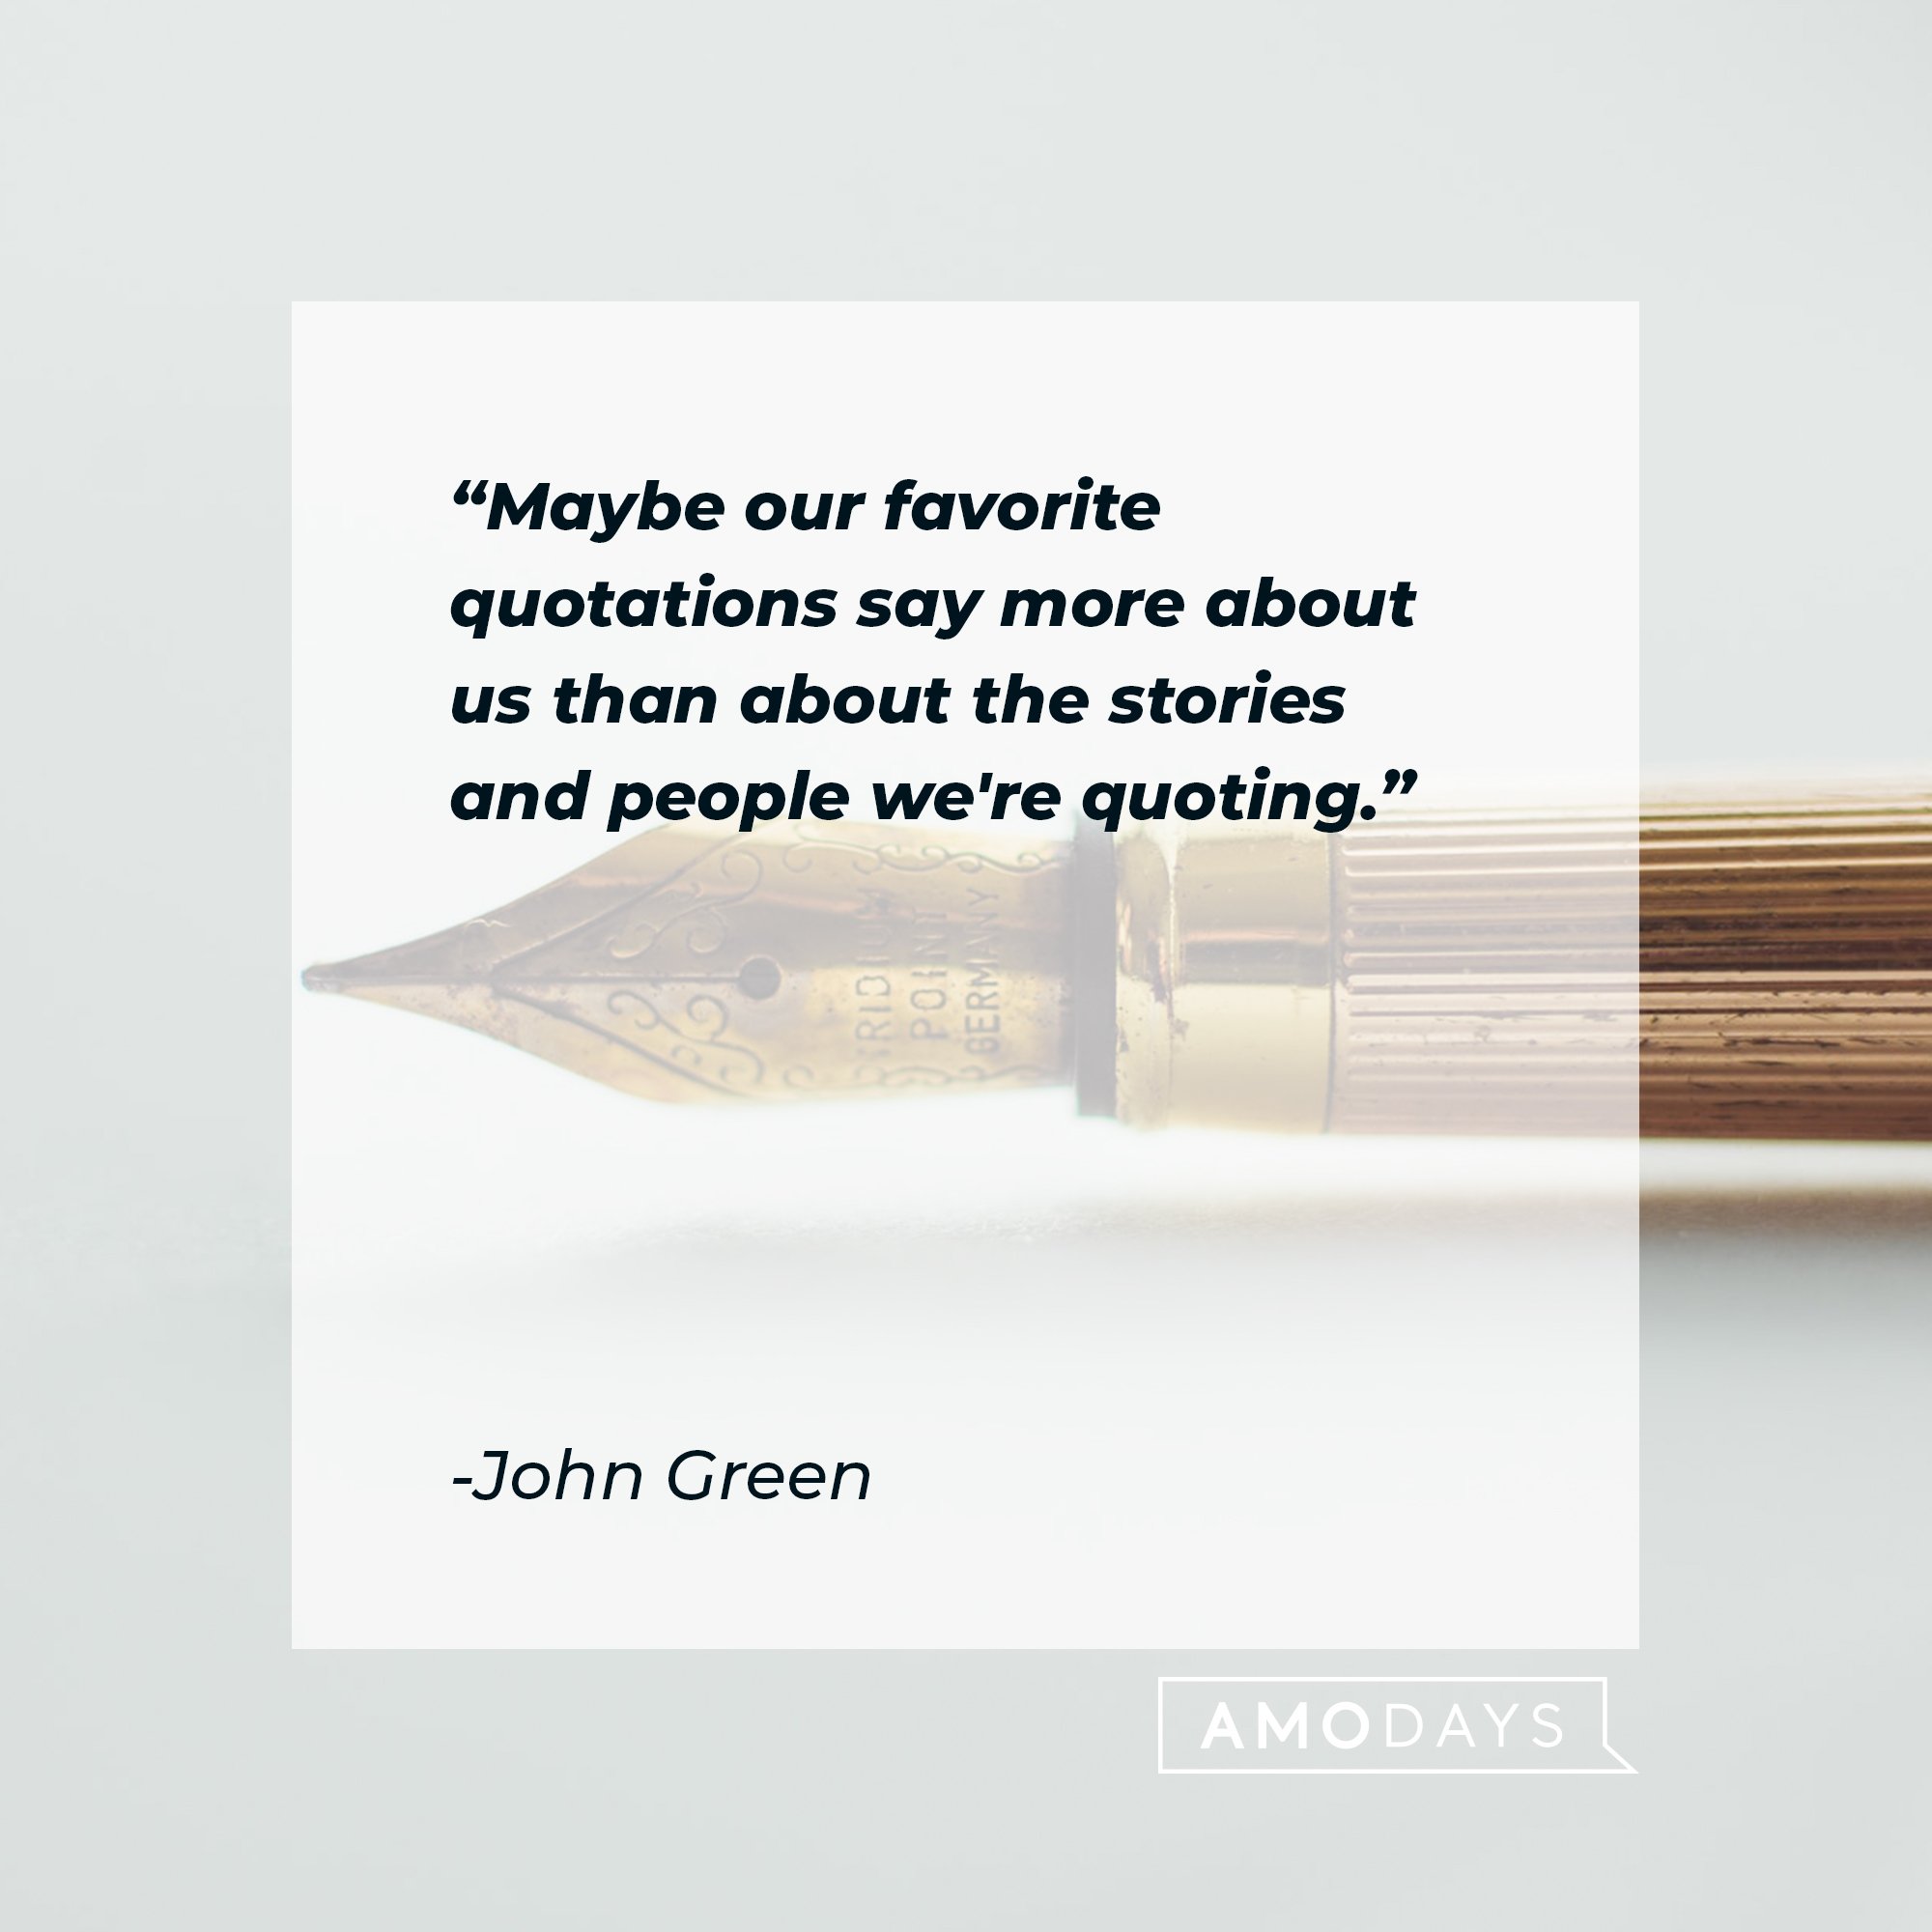 John Green's quote from “Paper Towns":  "Maybe our favorite quotations say more about us than about the stories and people we're quoting." | Image: AmoDays